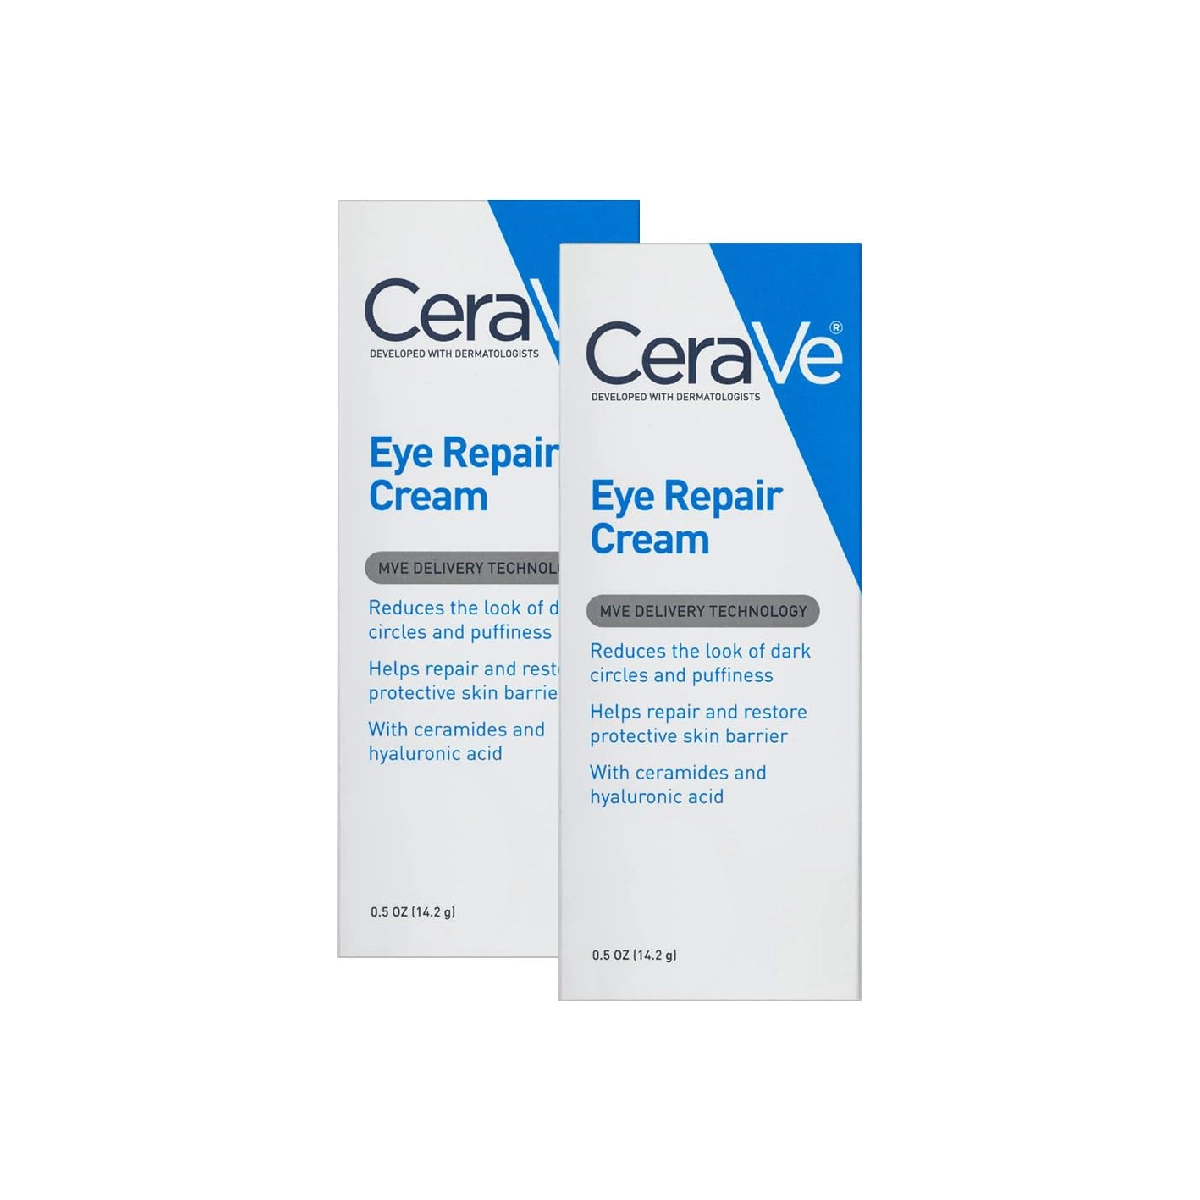 CeraVe Eye Repair Cream - product against a white background.